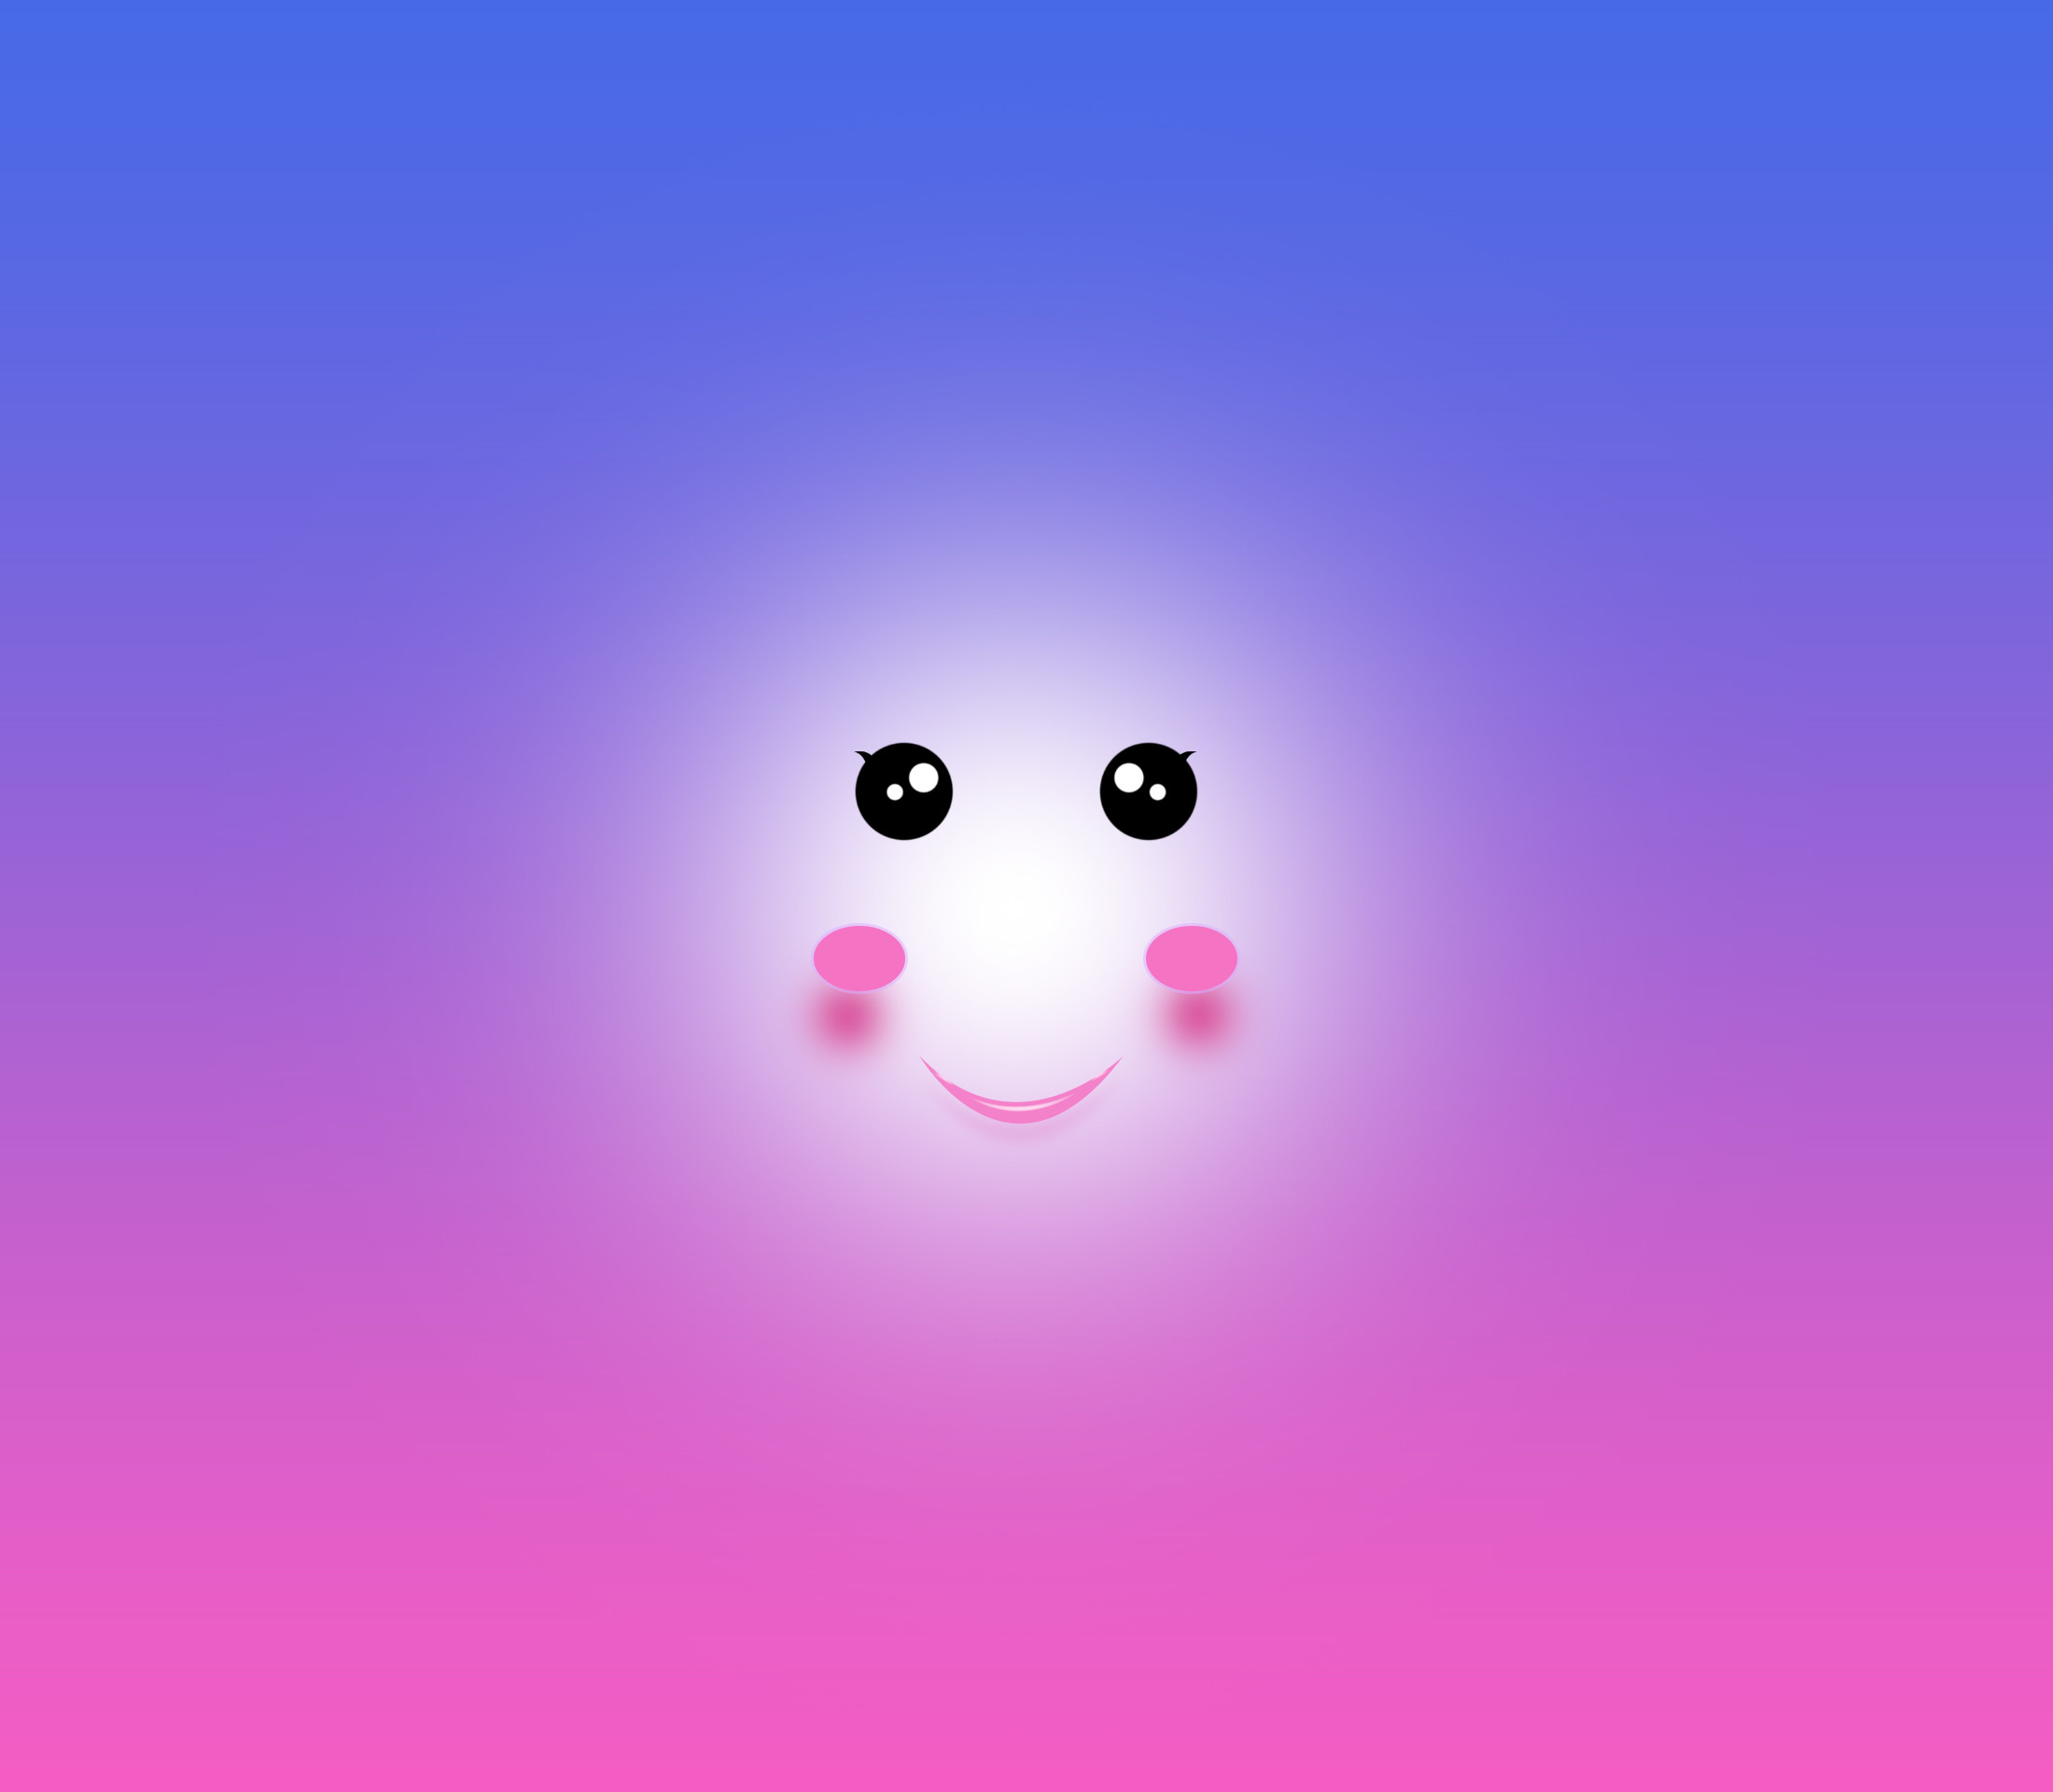 Girly Galaxy wallpapers Cute  APK 7 for Android  Download Girly Galaxy  wallpapers Cute  APK Latest Version from APKFabcom